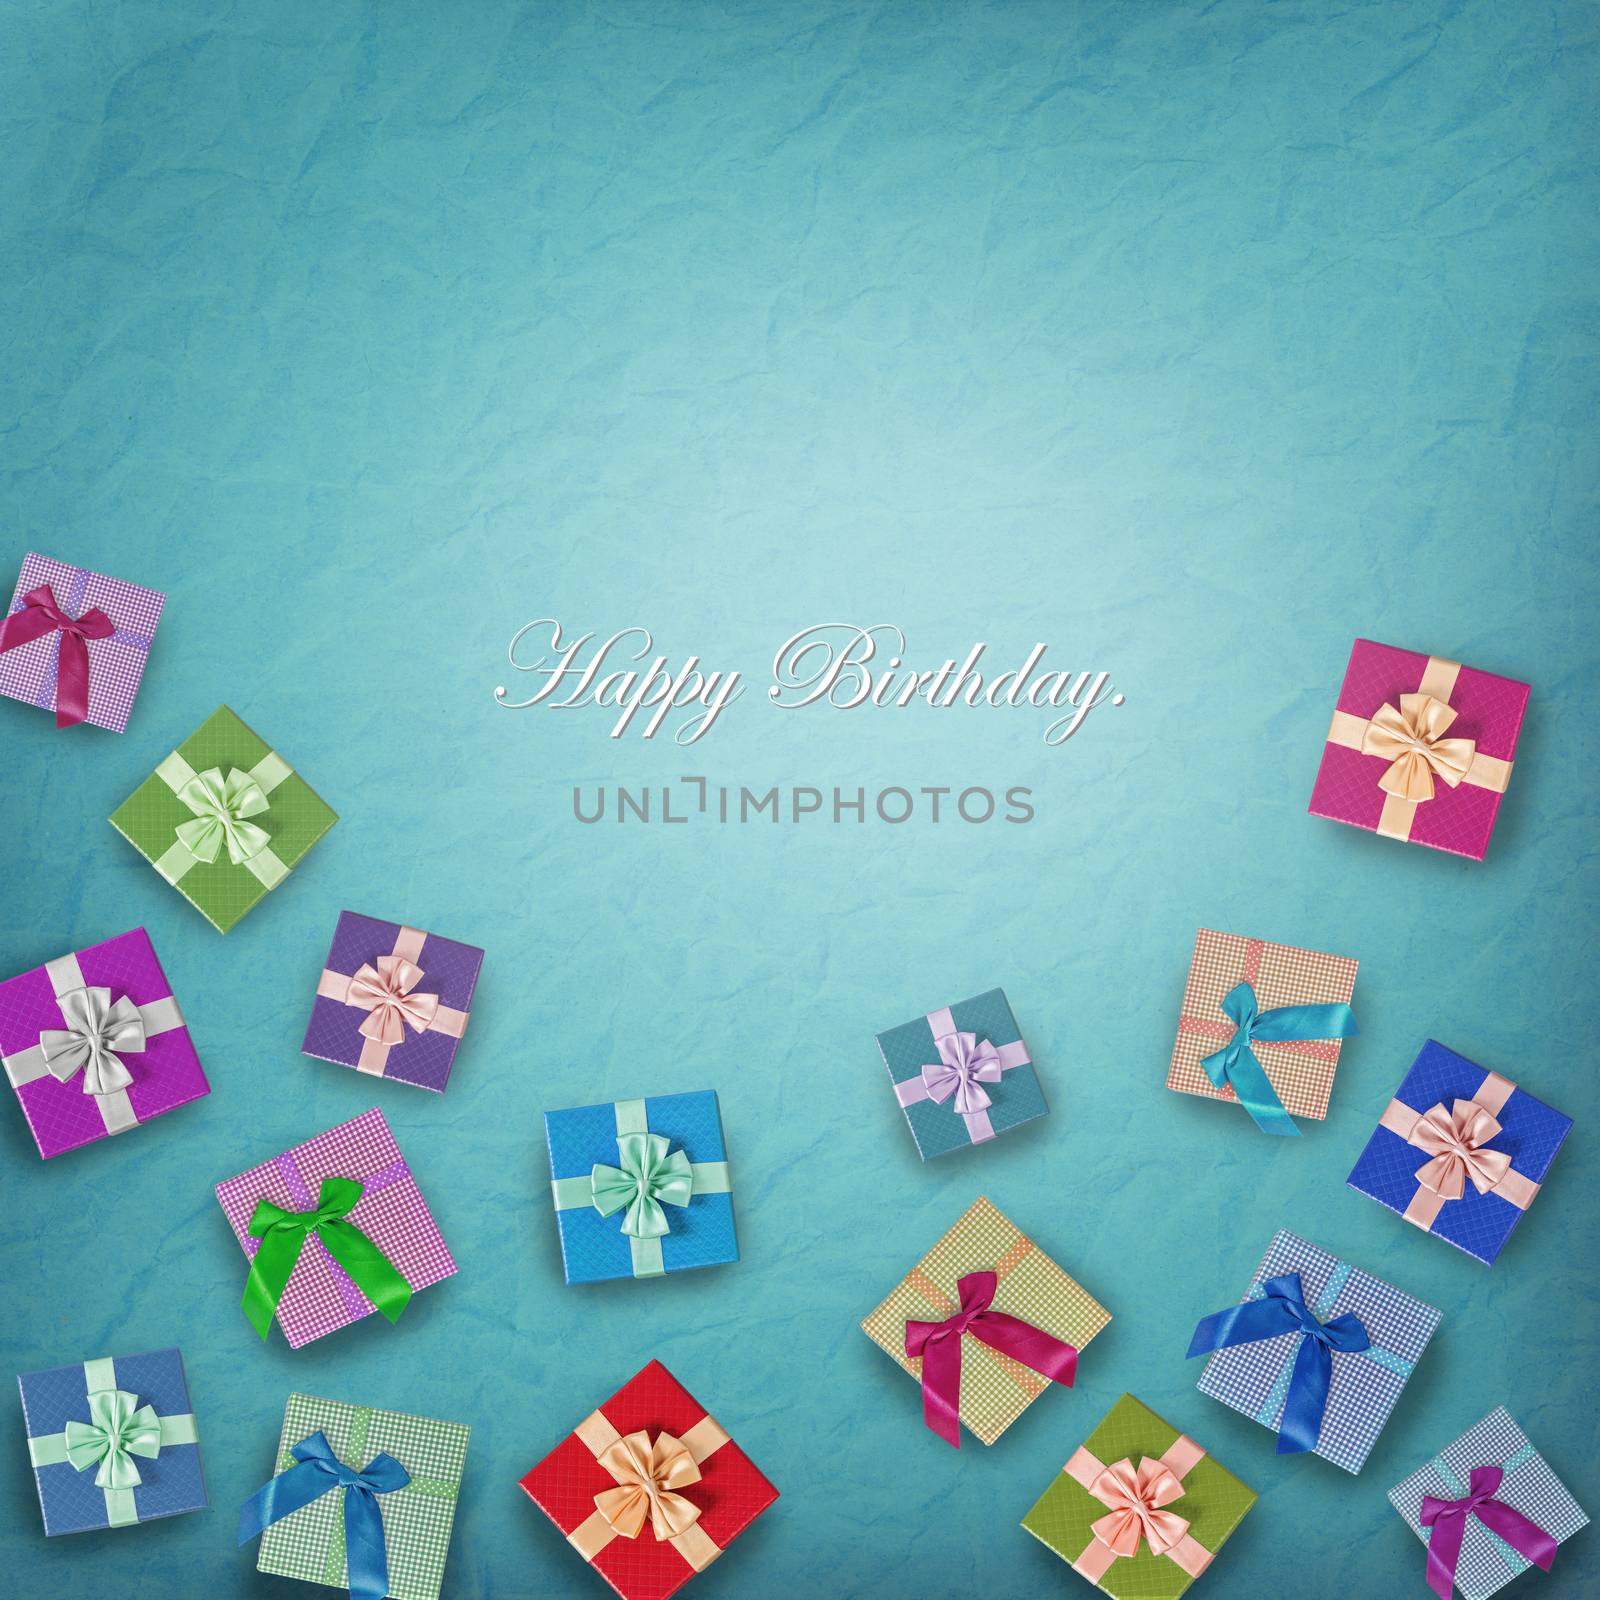 Happy birth day and beautiful gift box on blue color background with empty space for your text or message.